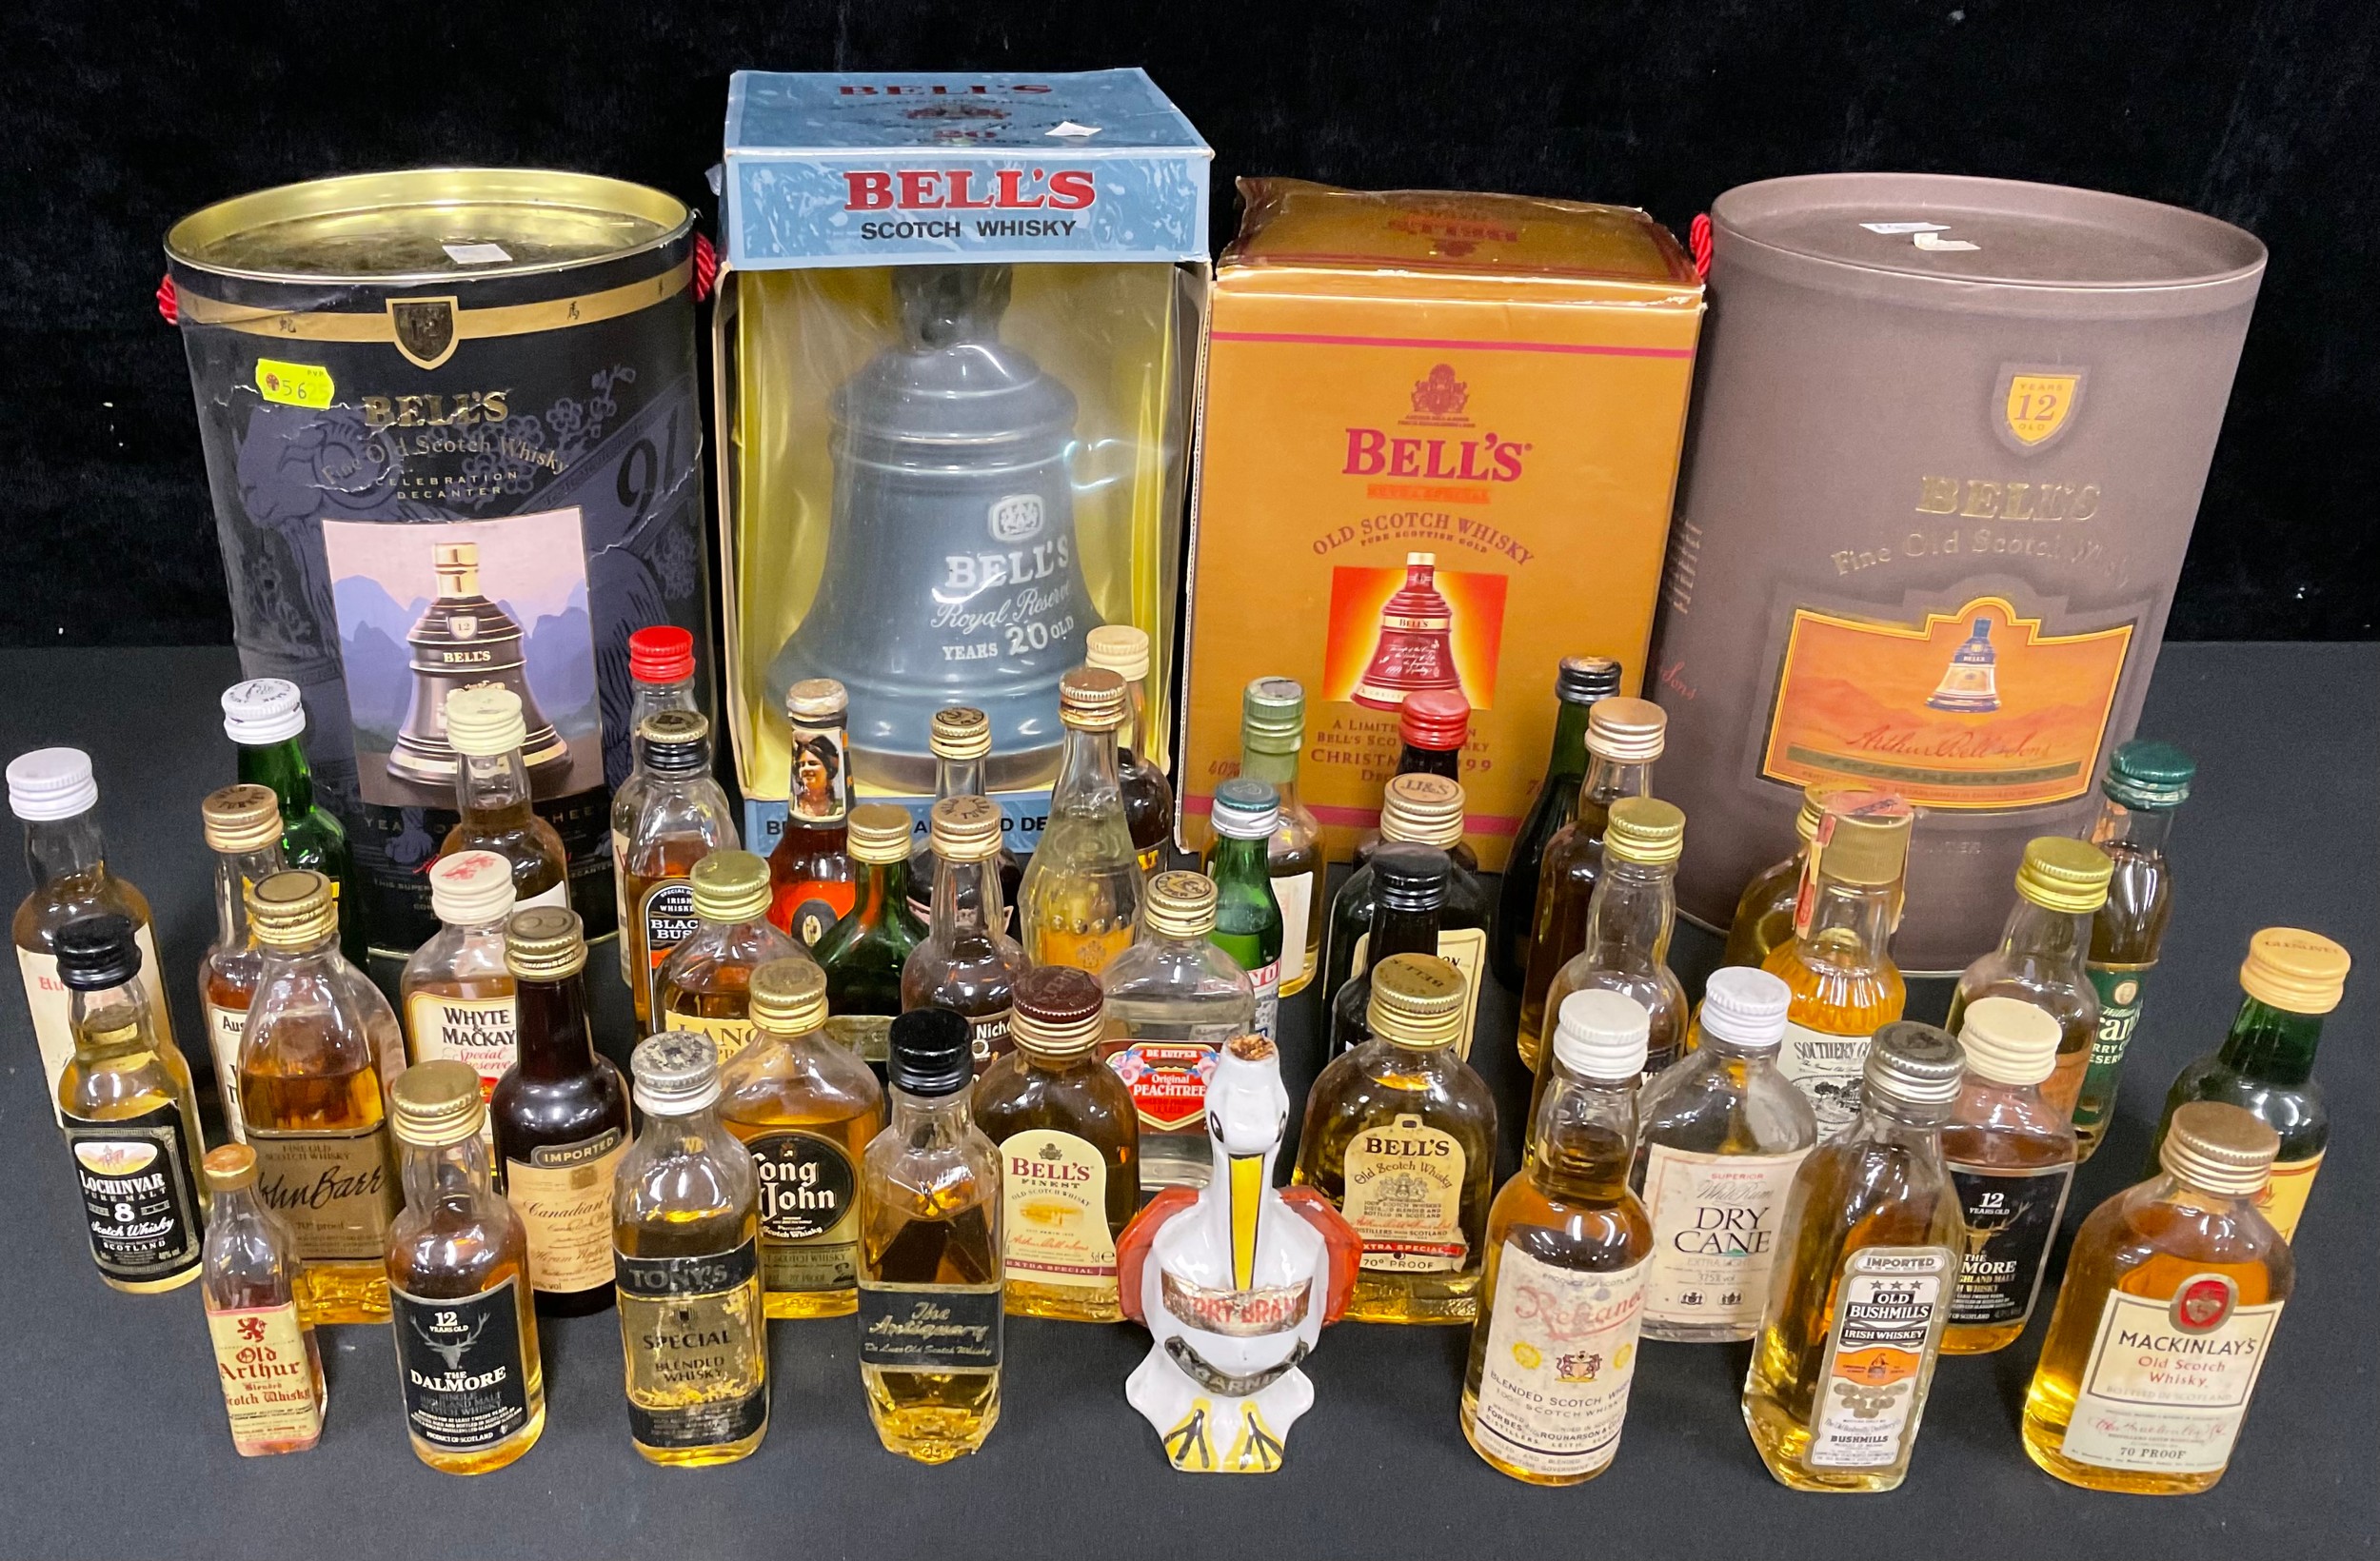 Wines & Spirits - Bells 12 Years Old Fine Old Scotch Whisky, 75cl, in Wade bell shaped bottle,